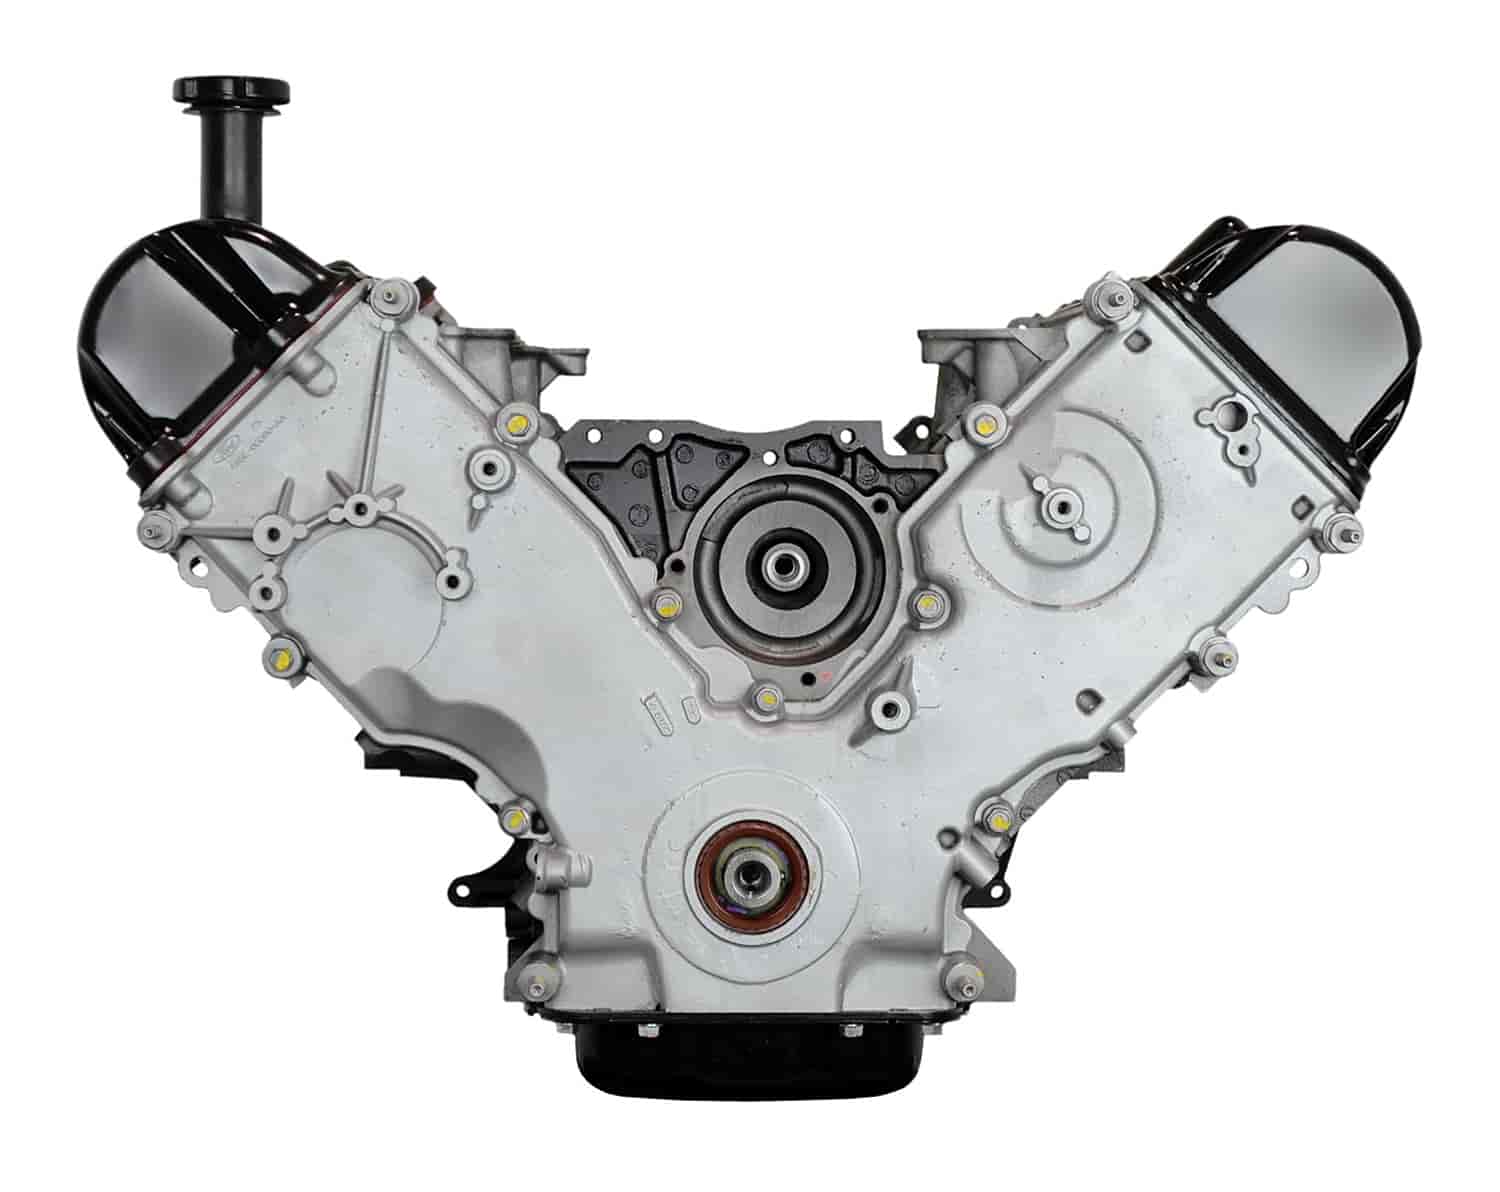 Remanufactured Crate Engine for 1999-2001 Ford F-Series Truck with 5.4L V8